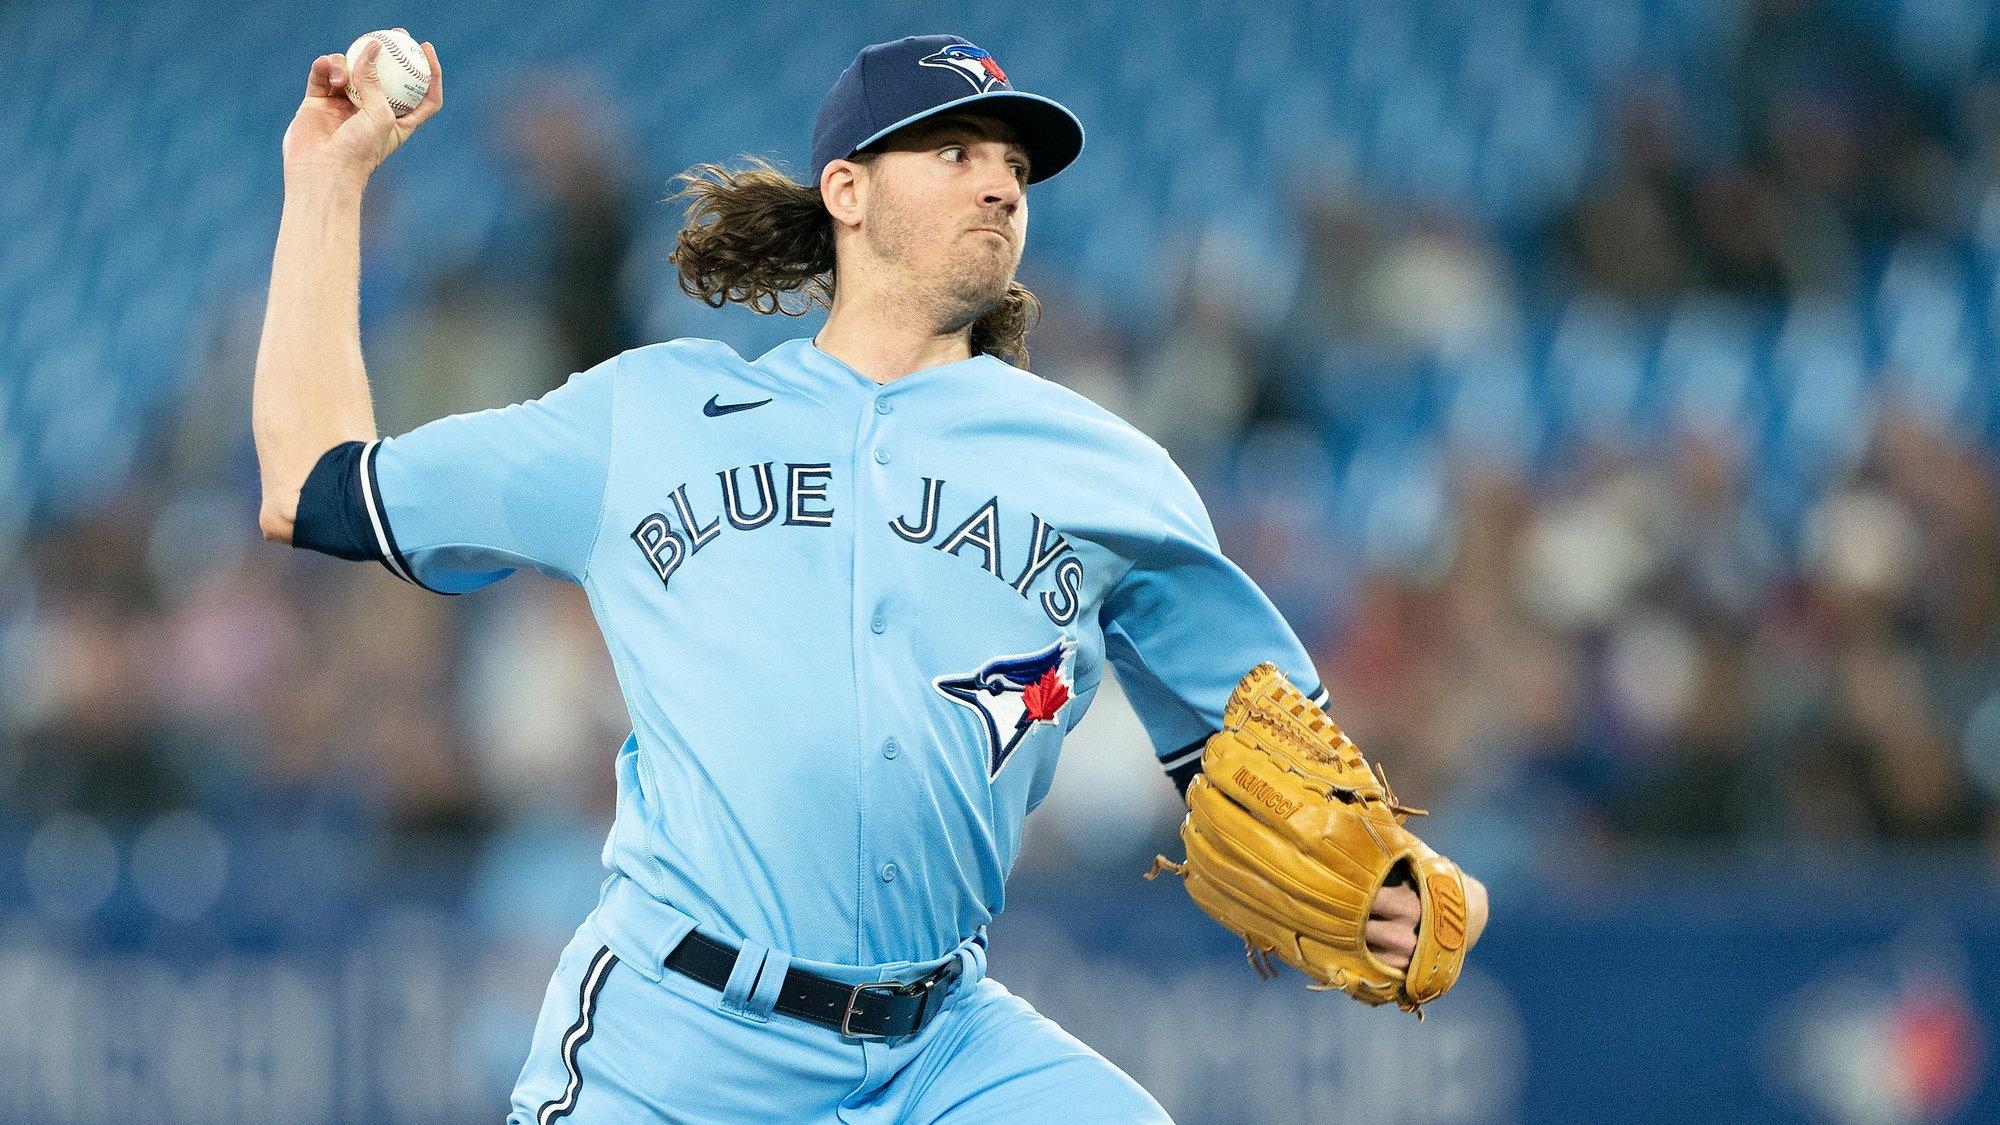 Mariners vs. Blue Jays Betting (May 18): Back Jays to break out brooms vs. Seattle